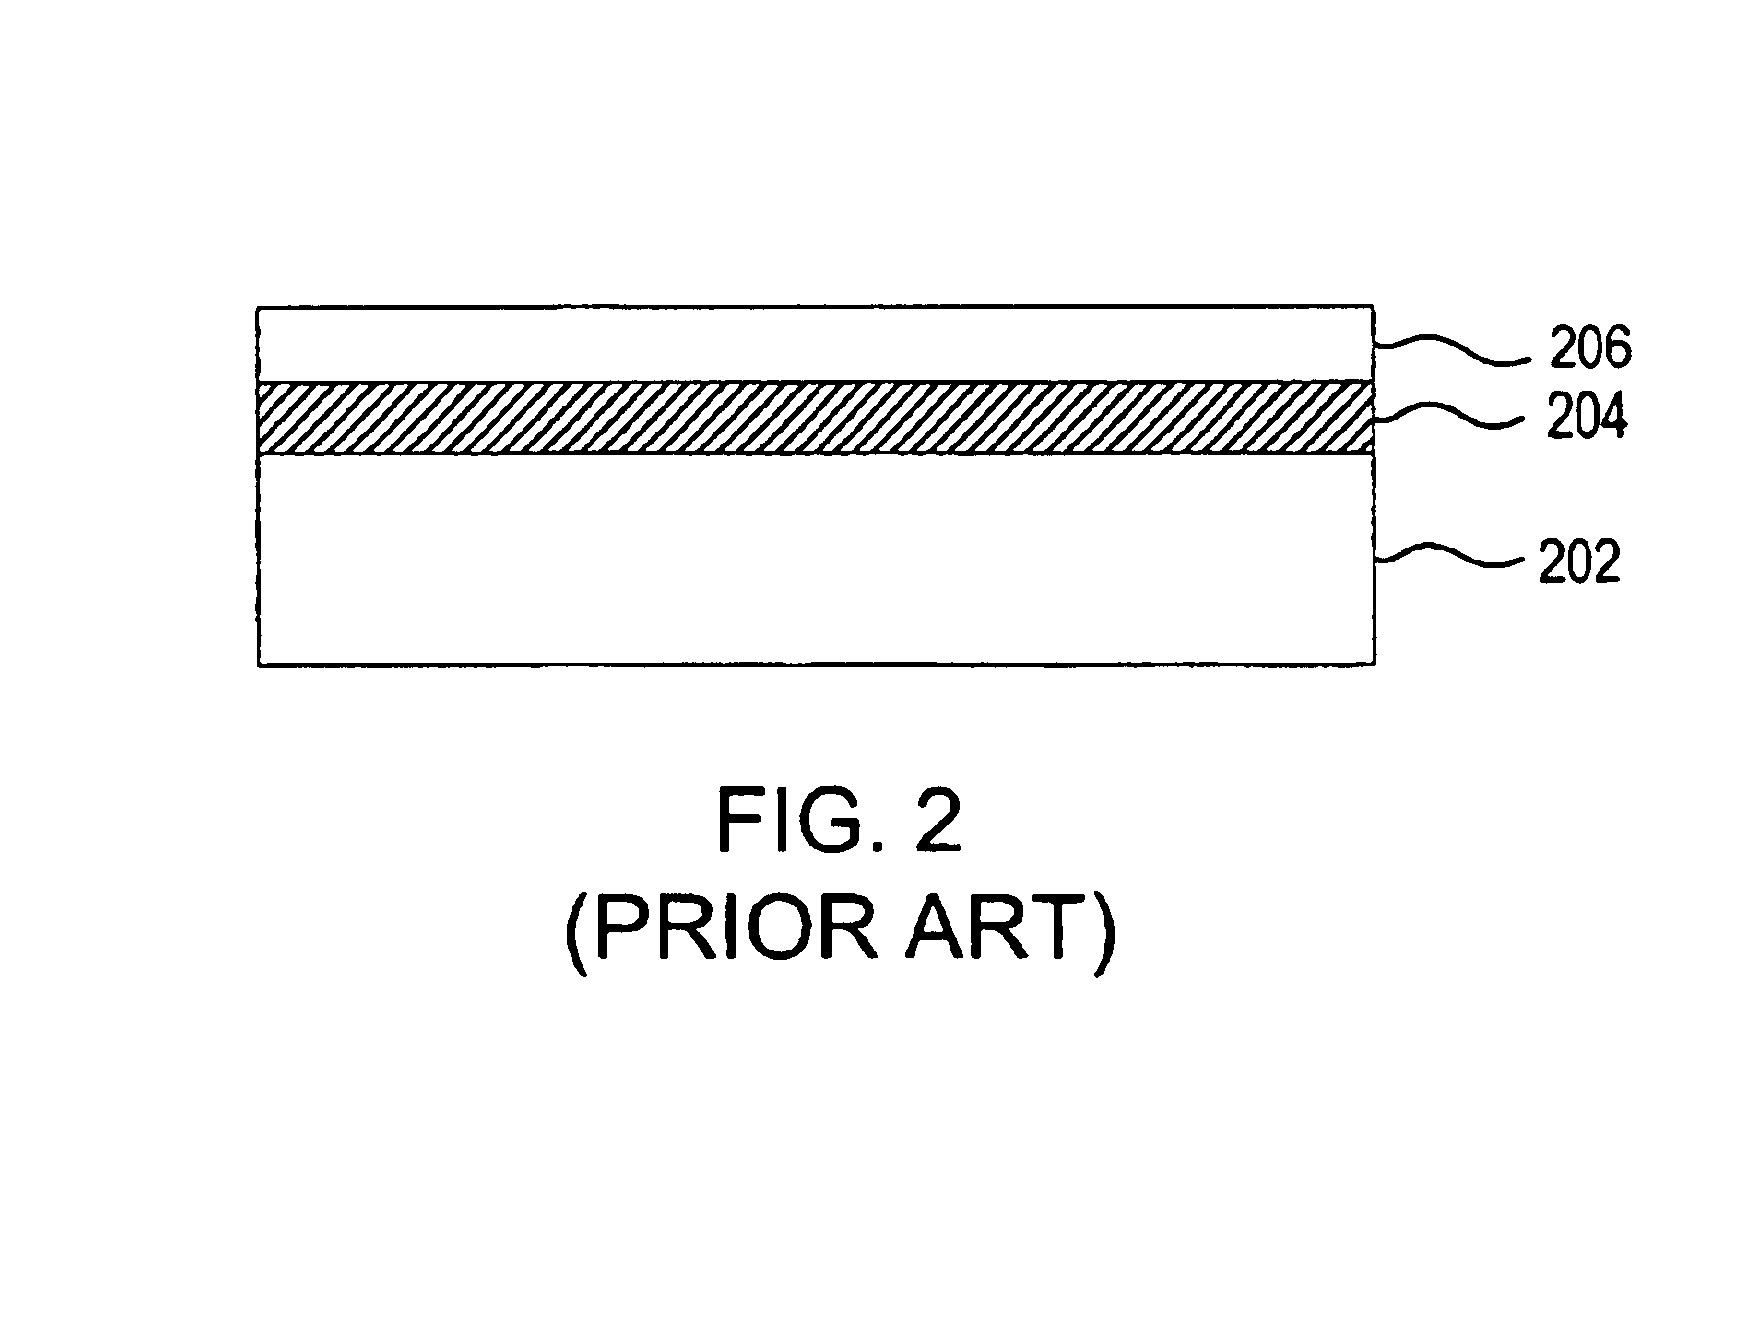 Apparatuses and methods for depositing an oxide film